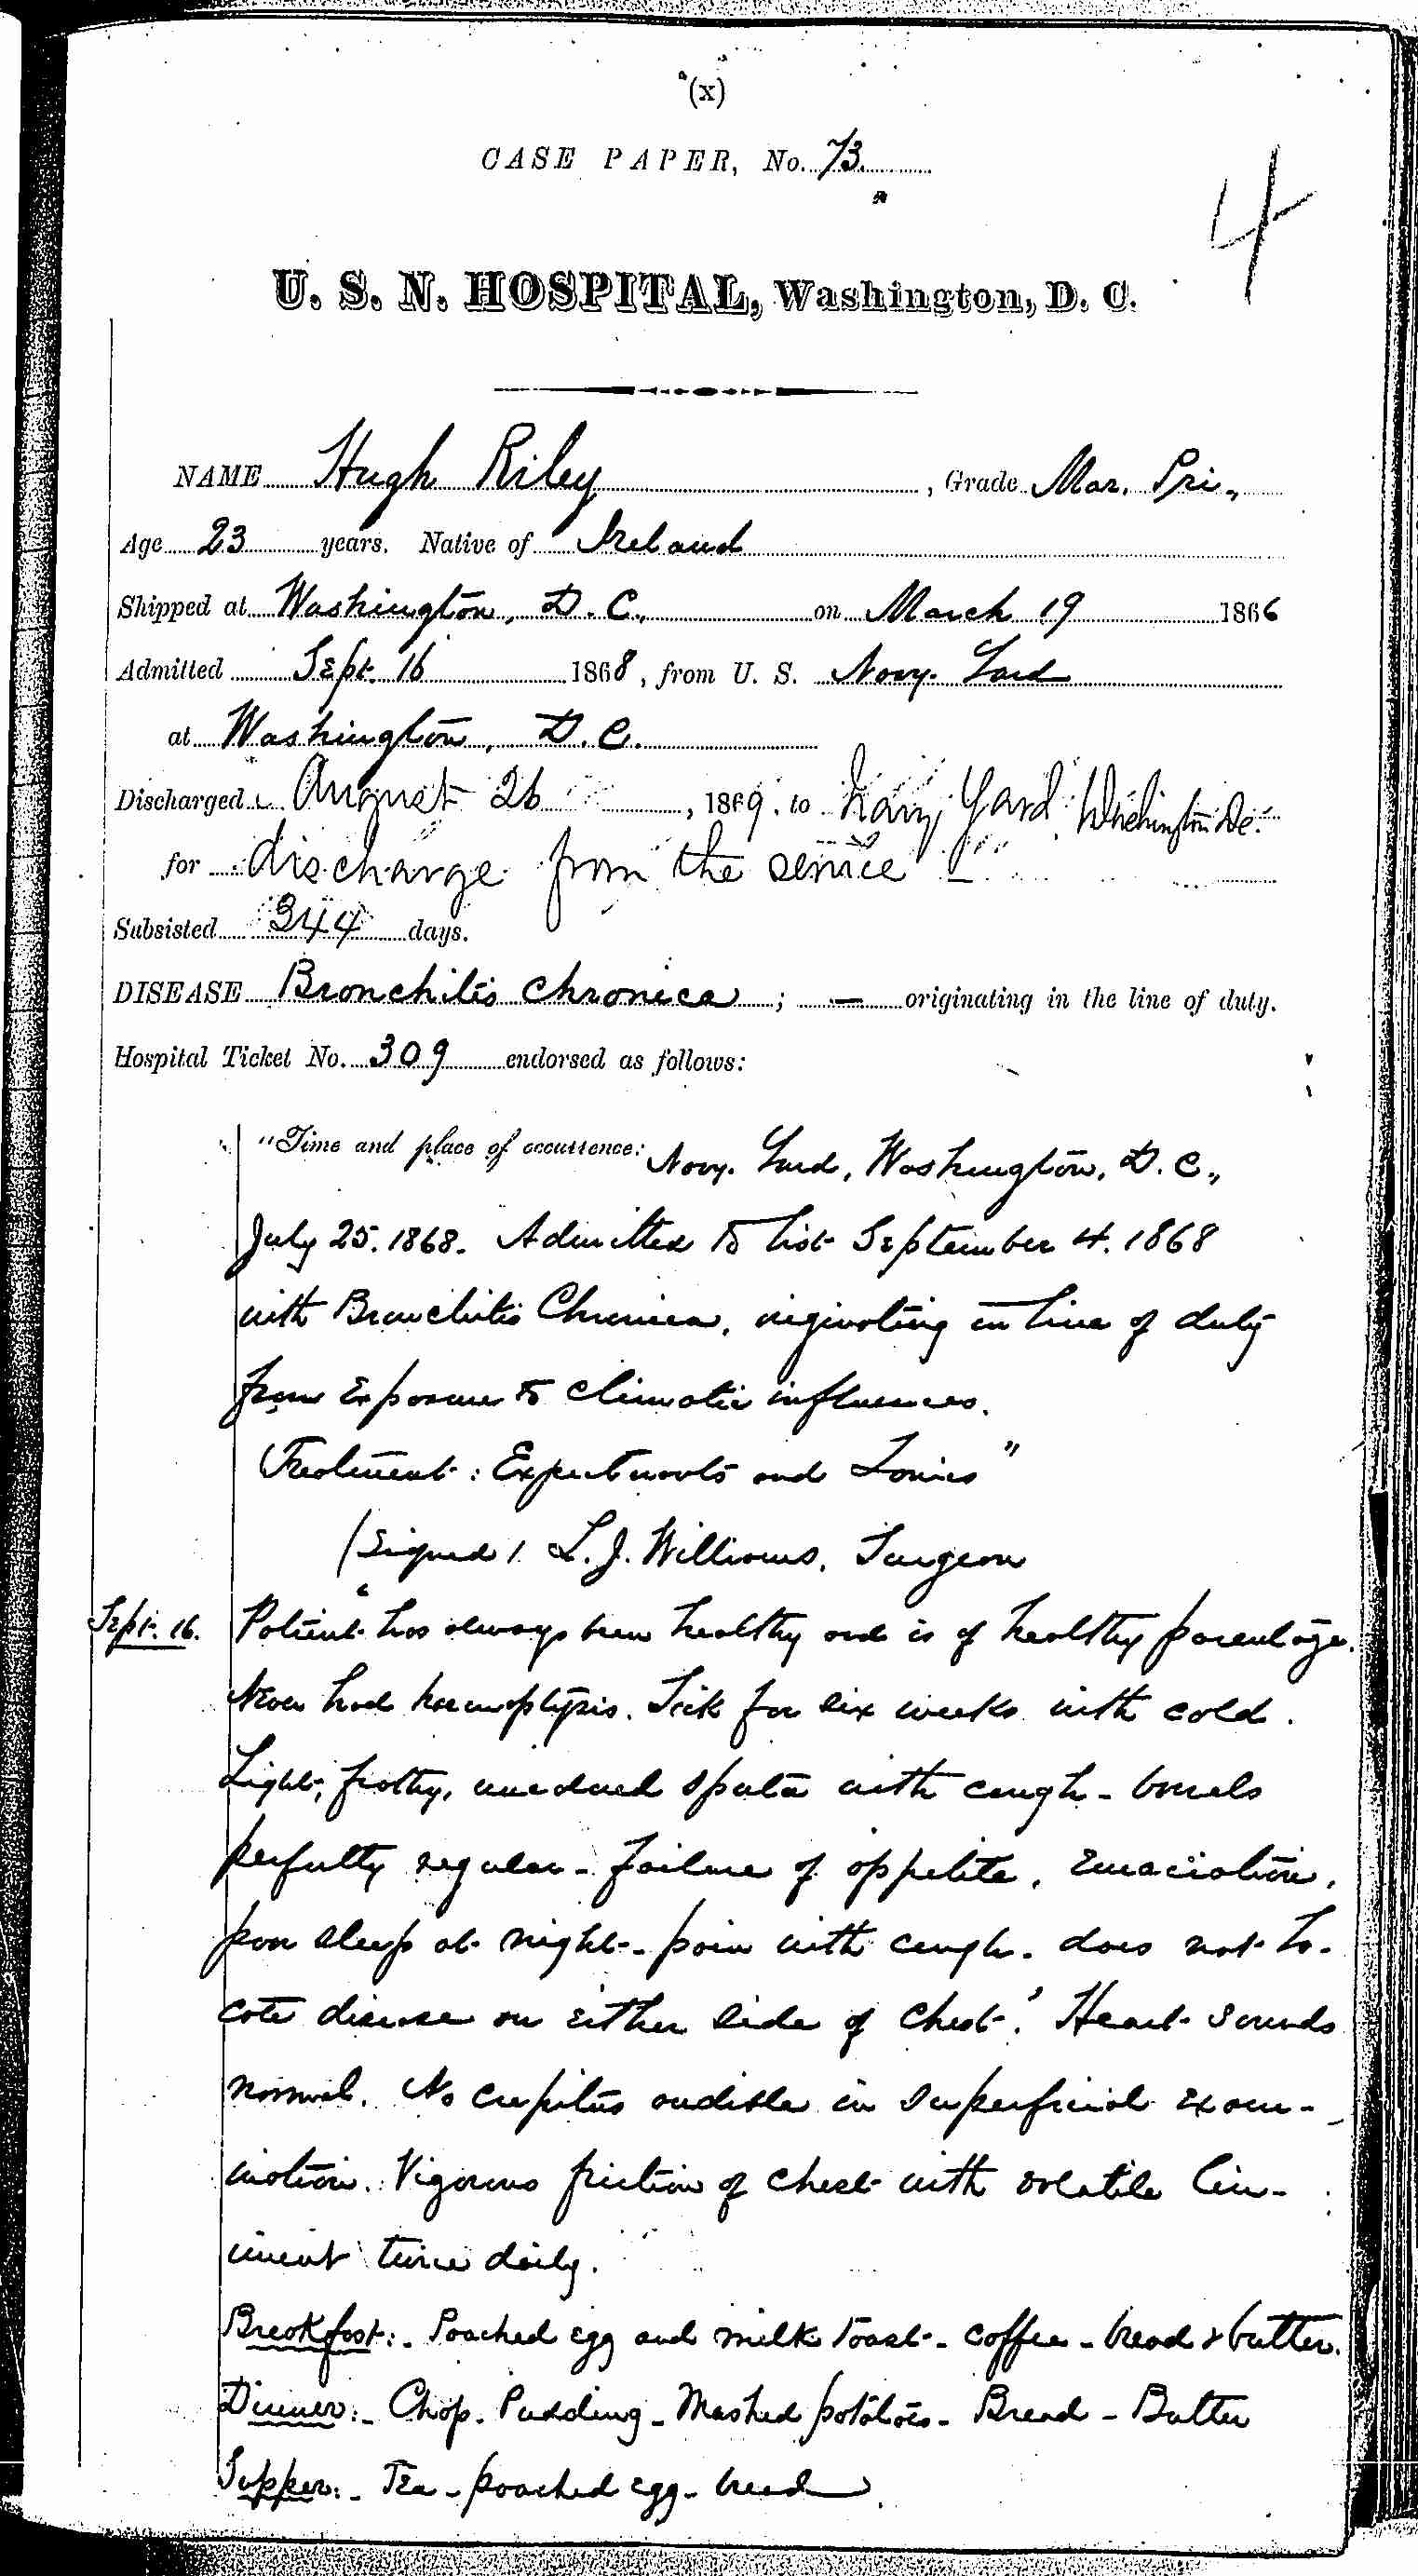 Entry for Hugh Riley (page 1 of 31) in the log Hospital Tickets and Case Papers - Naval Hospital - Washington, D.C. - 1868-69